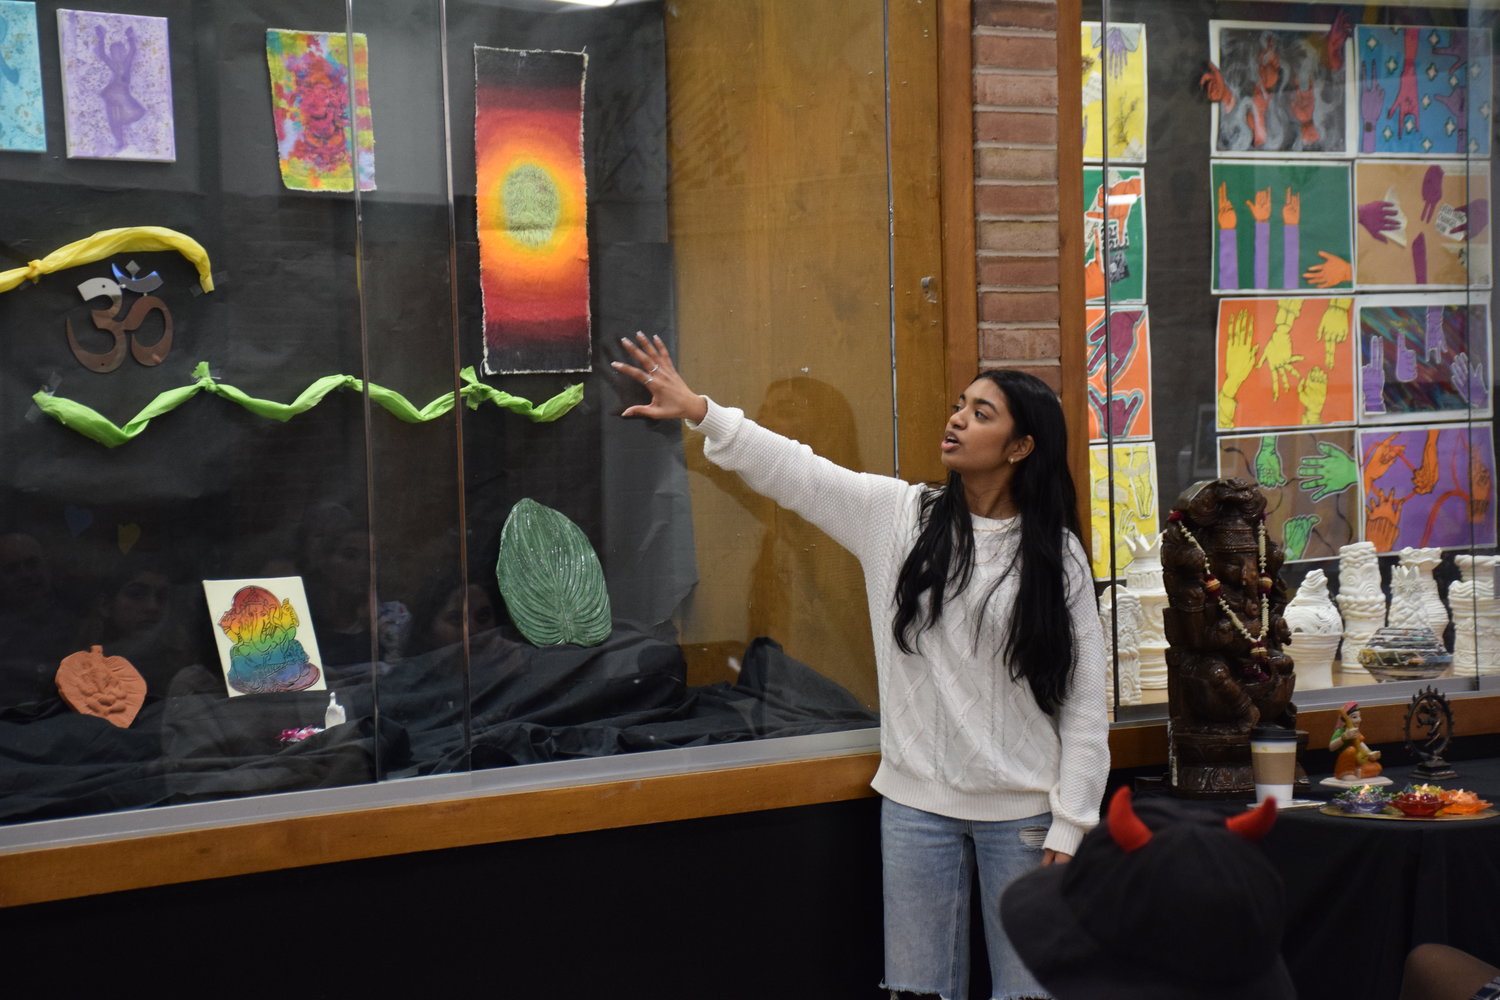 Anika Datta, another senior in the IB Art program, discussed how her artistic style was influenced by traditional depictions of the Hindu god Ganesh.